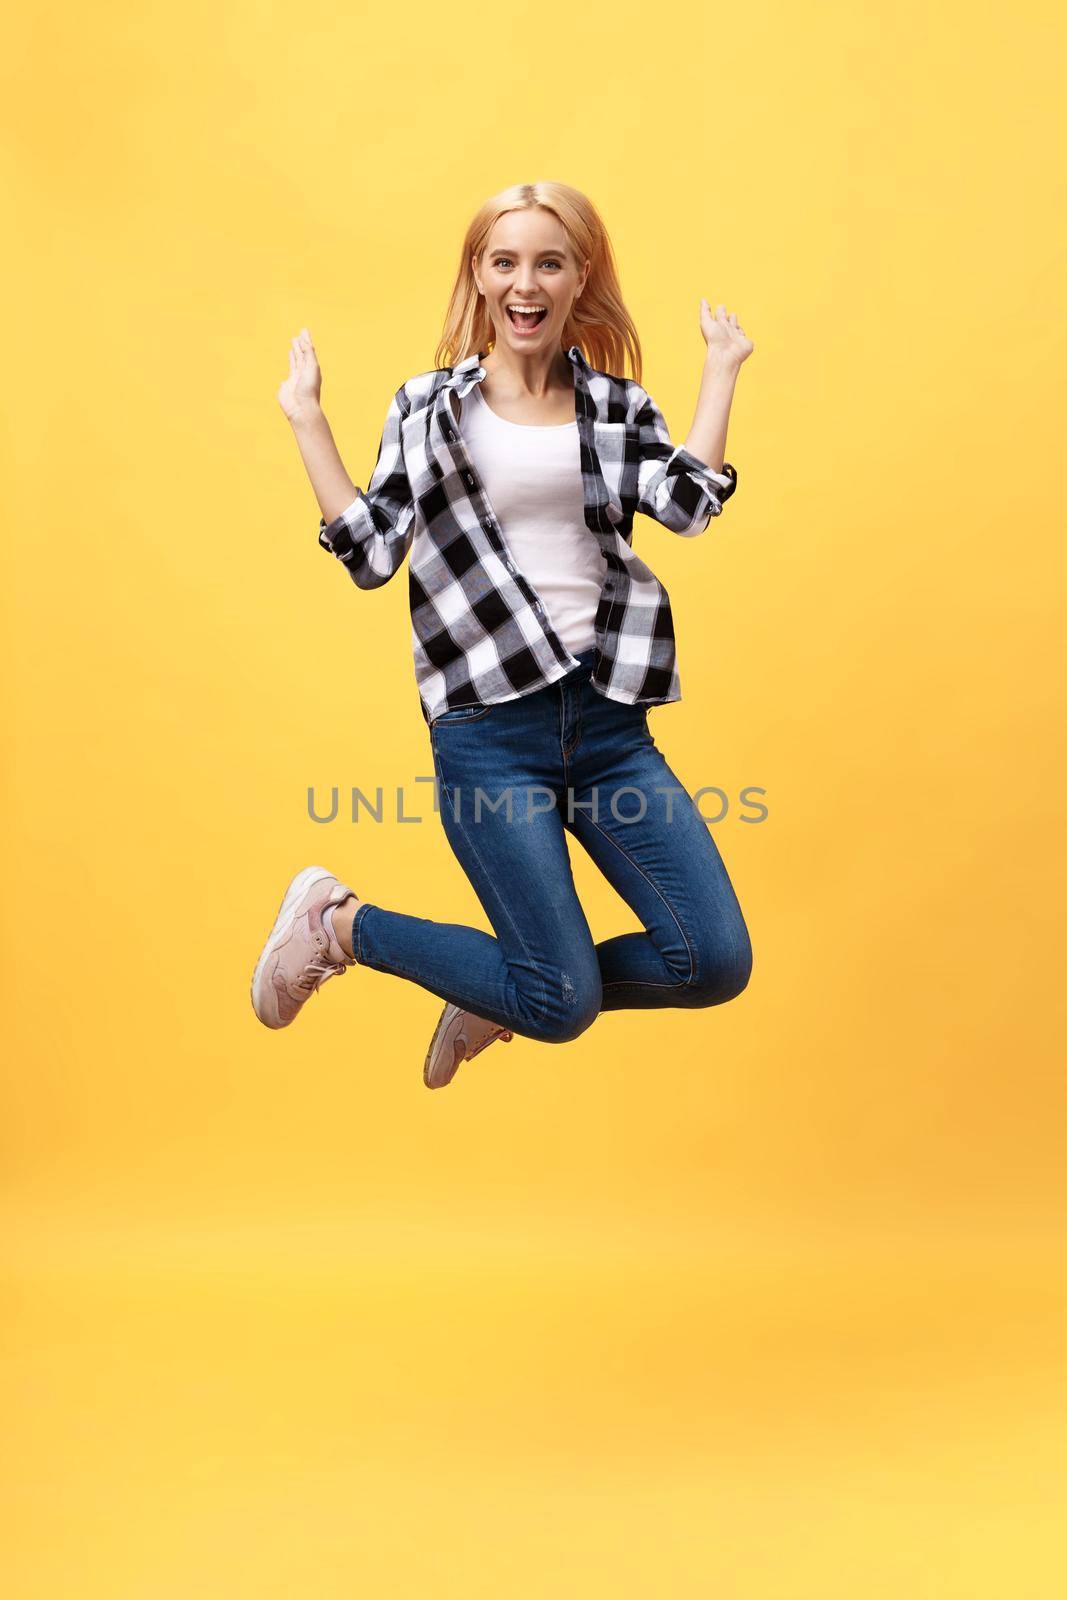 Portrait of surprised young woman in black pants jumping in front of yellow wall. Indoor portrait of young lady in fooling around in studio.